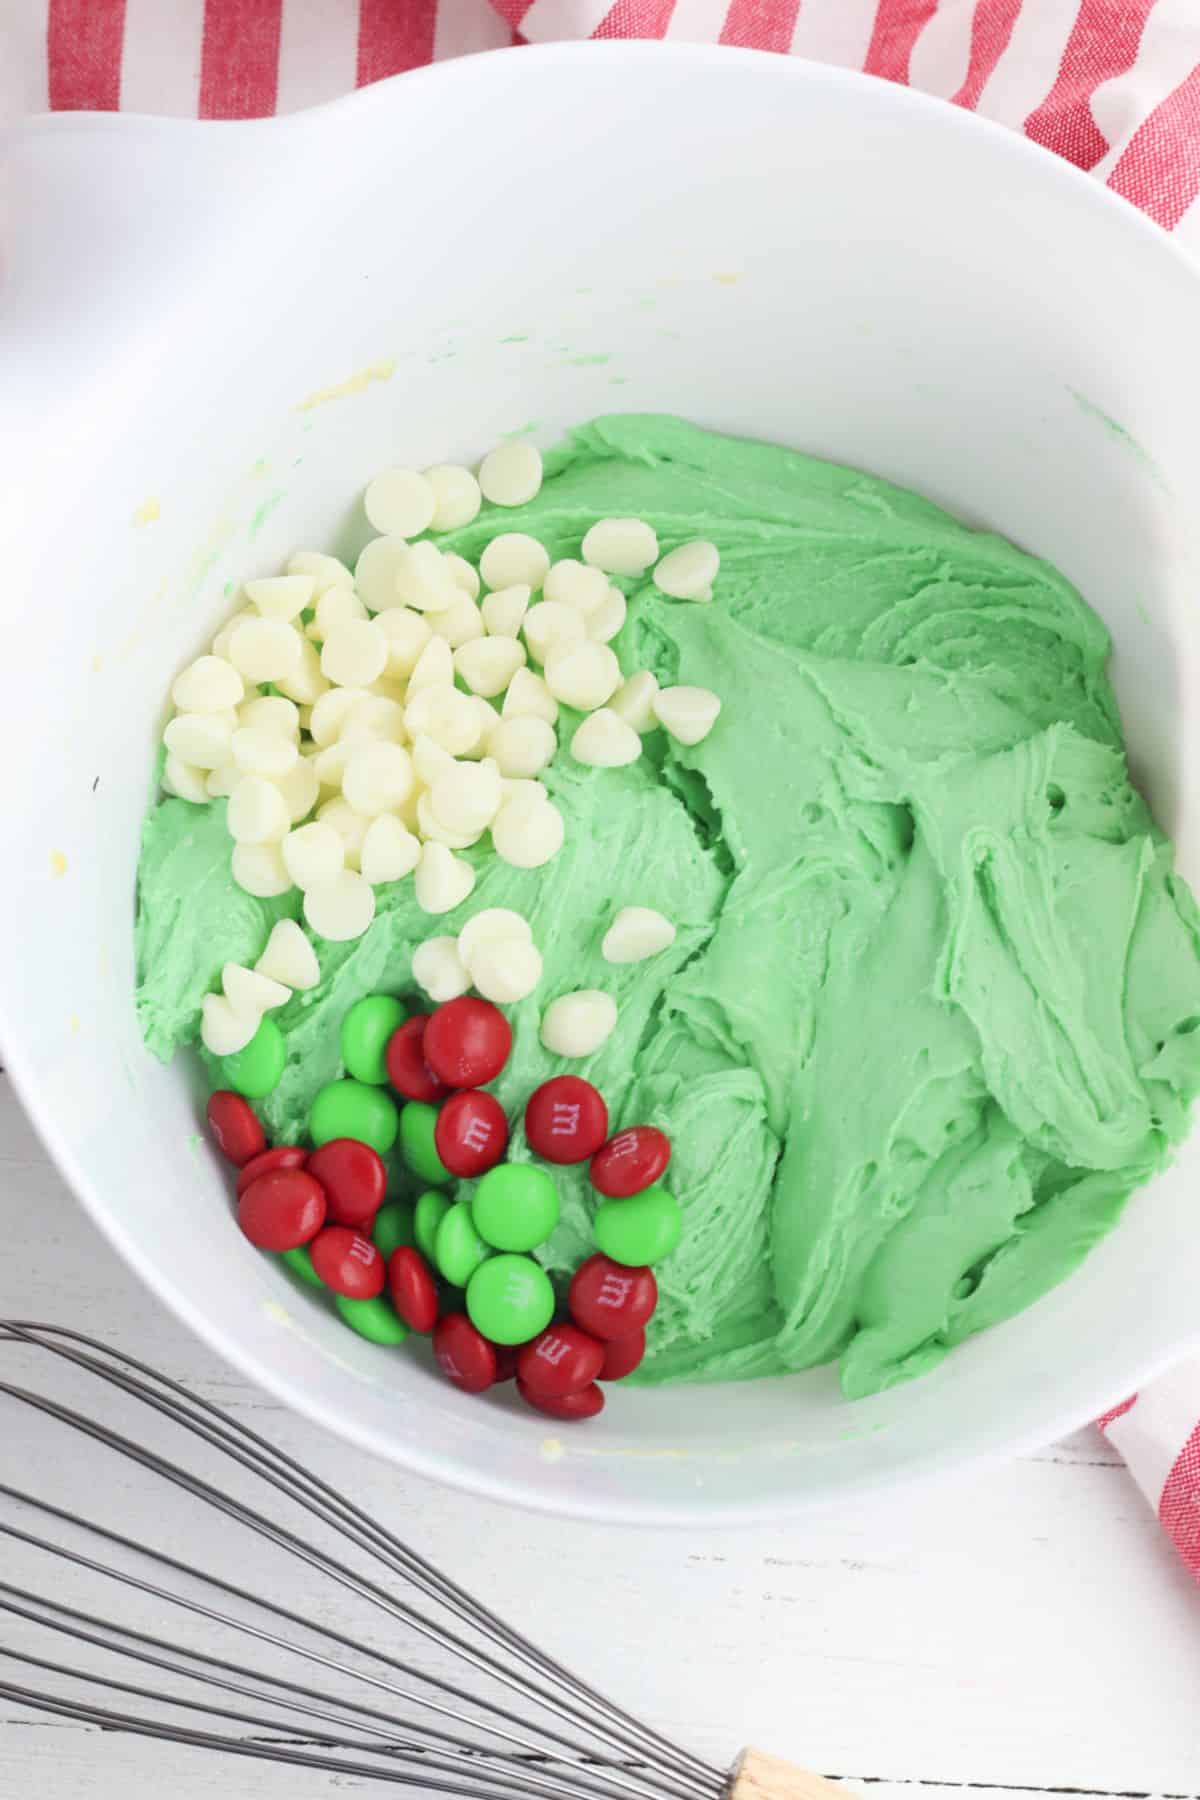 Dough mixture with white chocolate chips  and M&Ms in a mixing bowl.